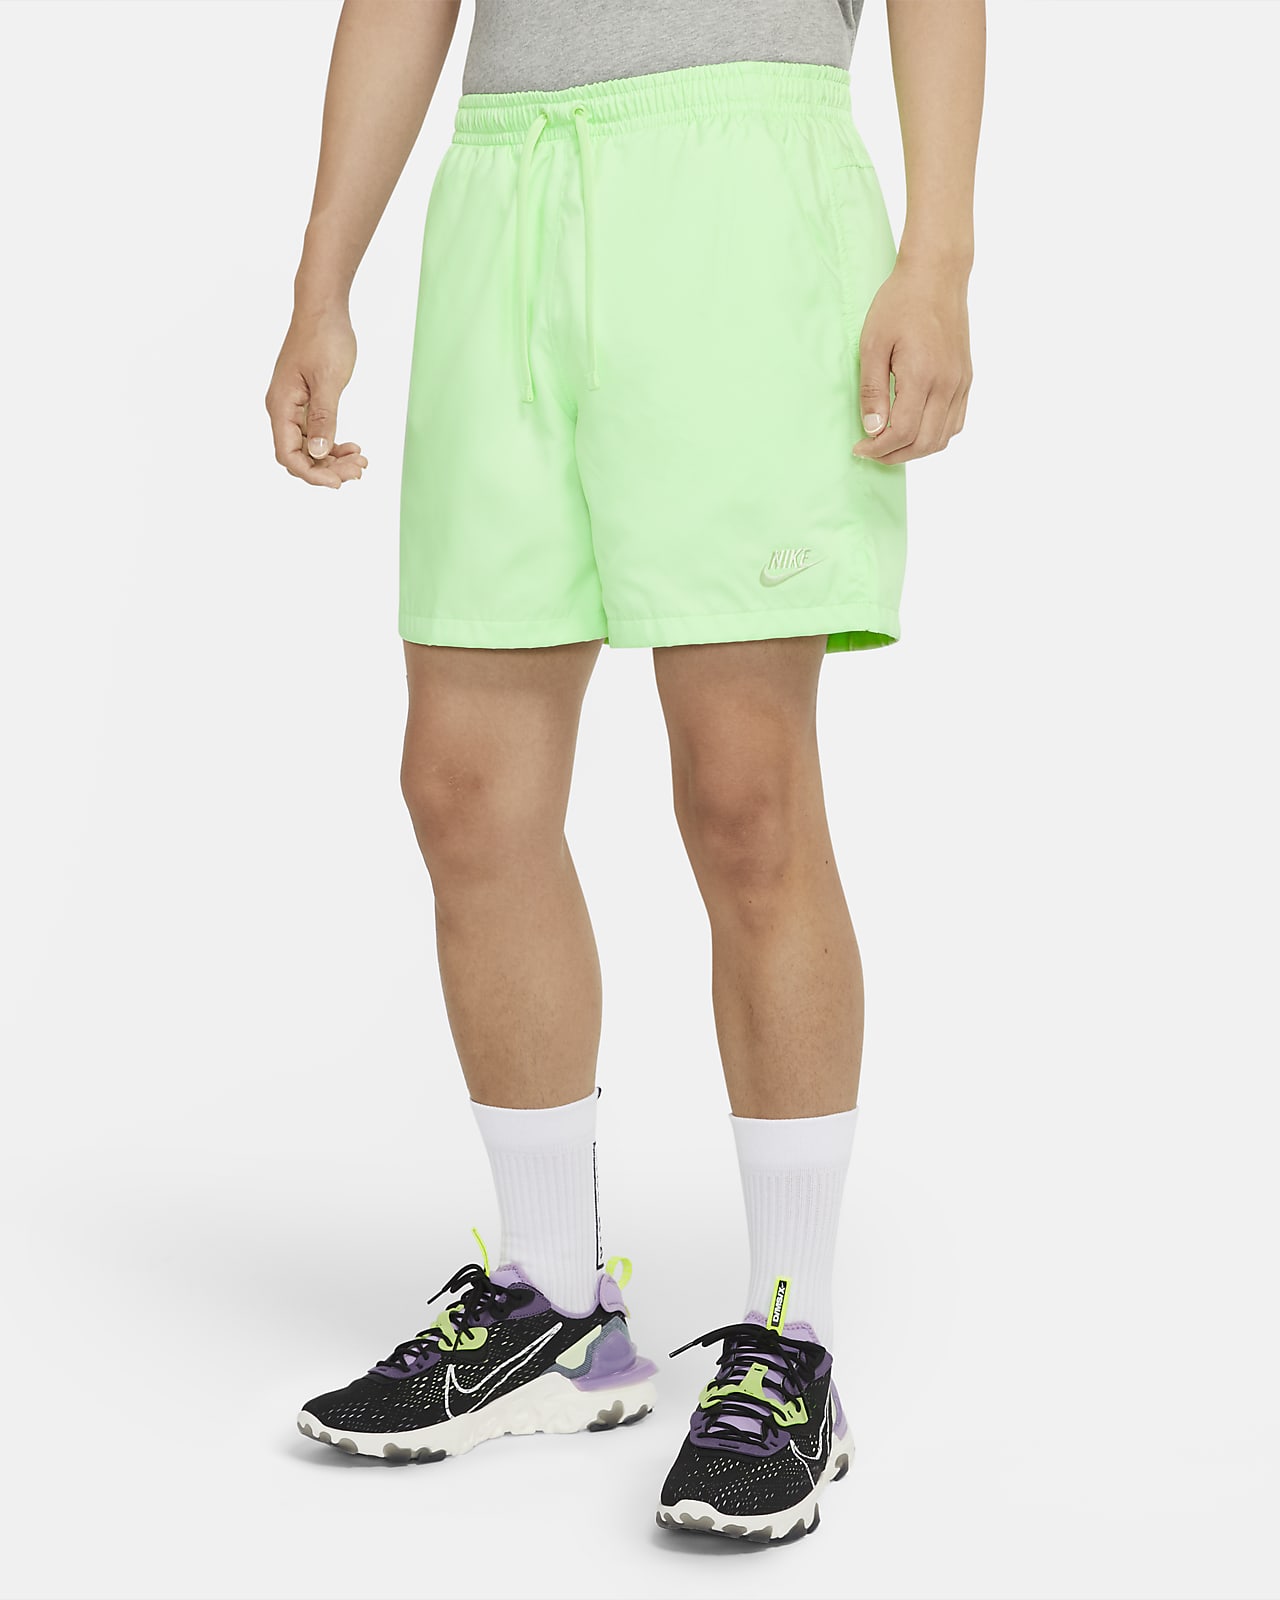 nike woven essential shorts